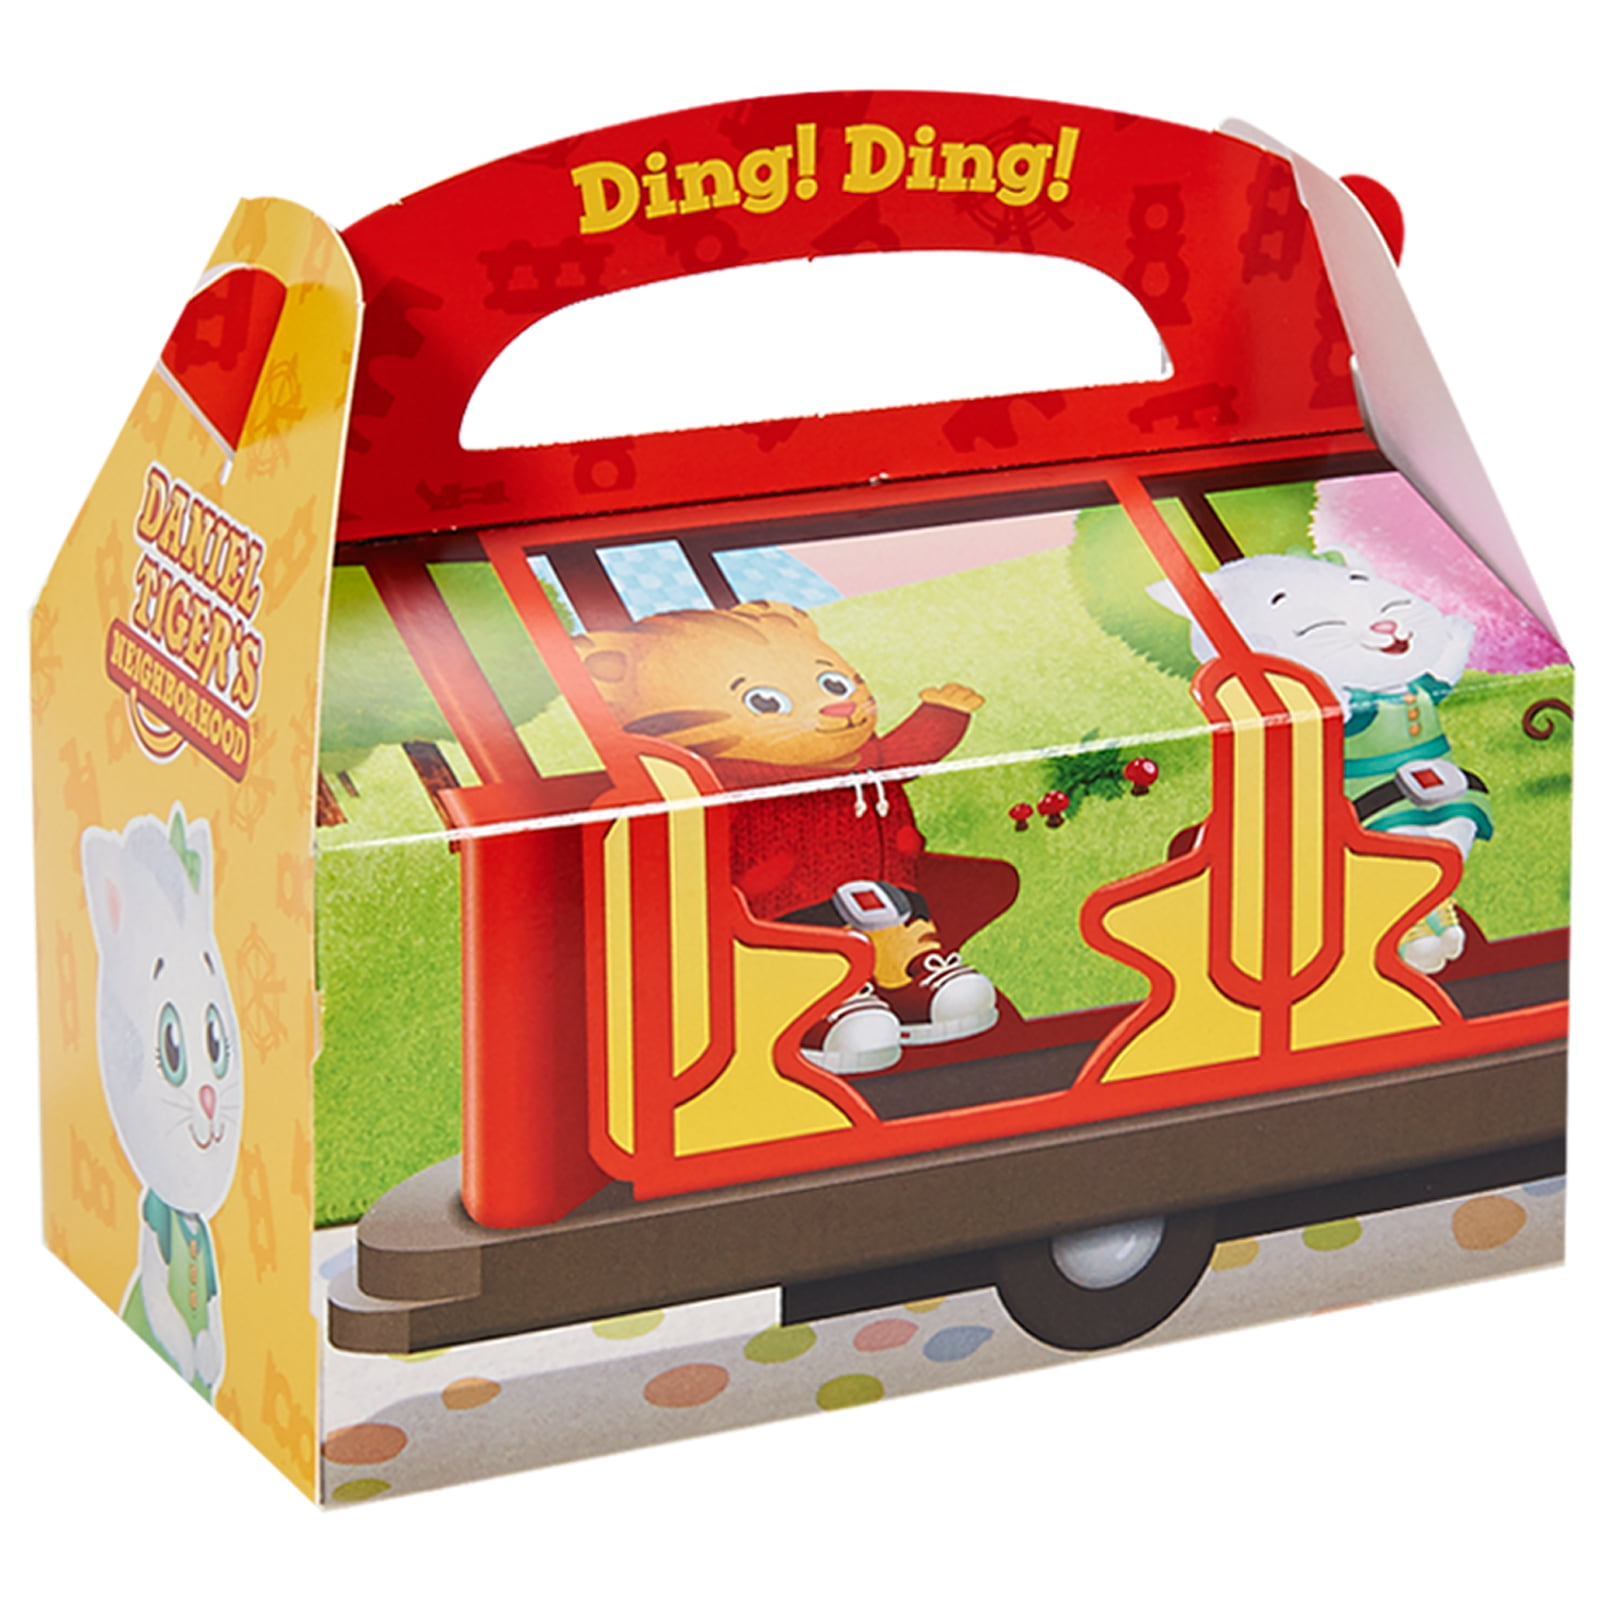 Details about   DANIEL TIGER'S NEIGHBORHOOD Birthday party table CONFETTI 1 pack w/3 types